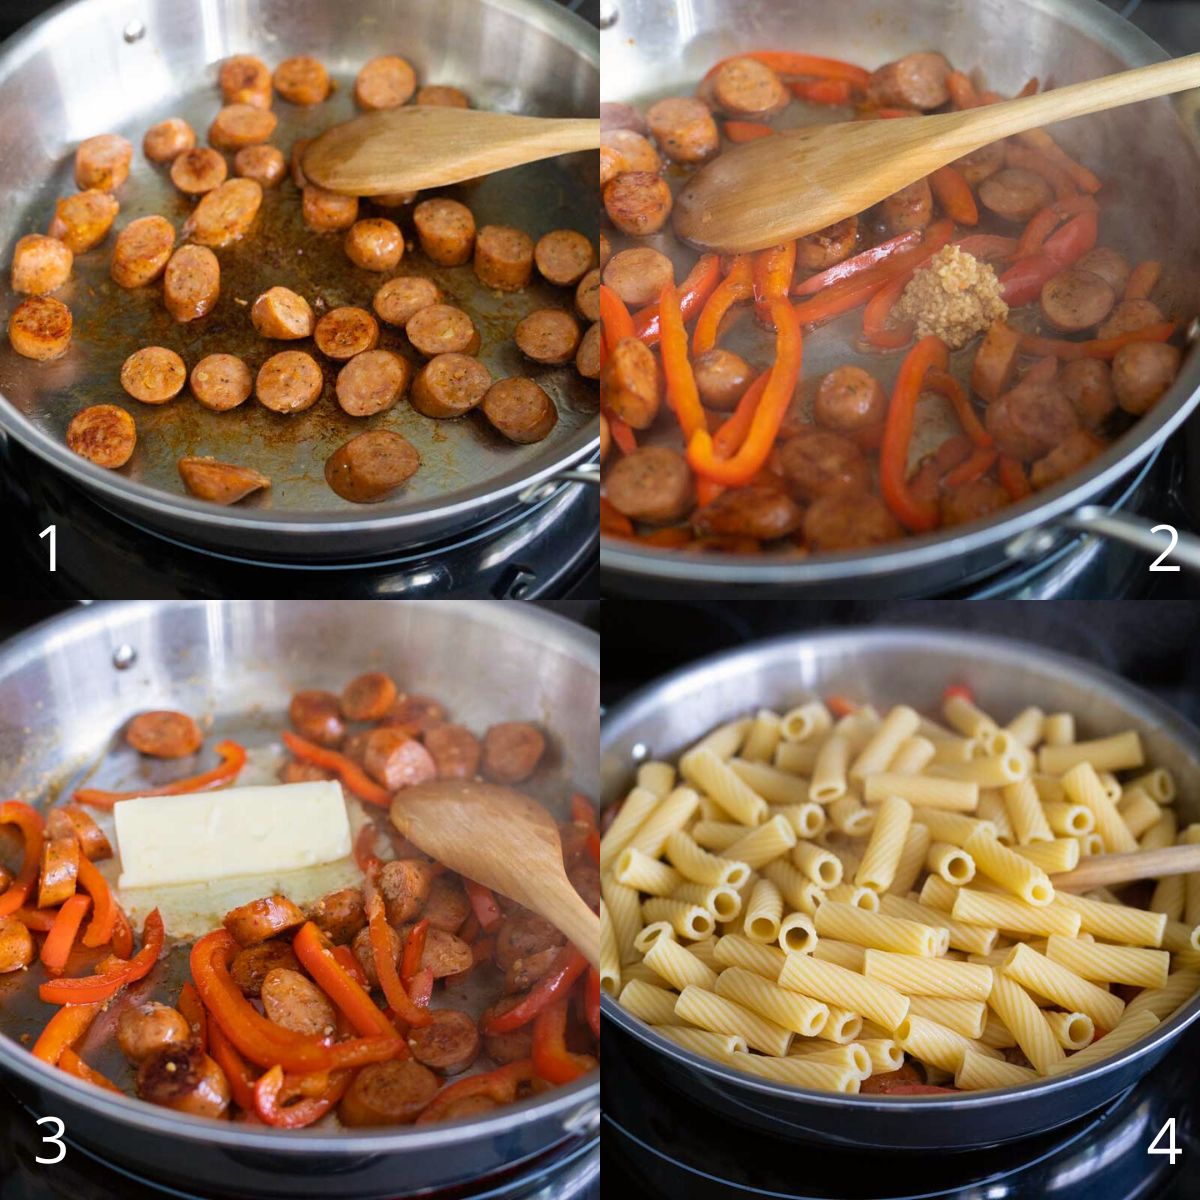 Step by step photos show how to brown the sausage and build the pasta in the skillet.